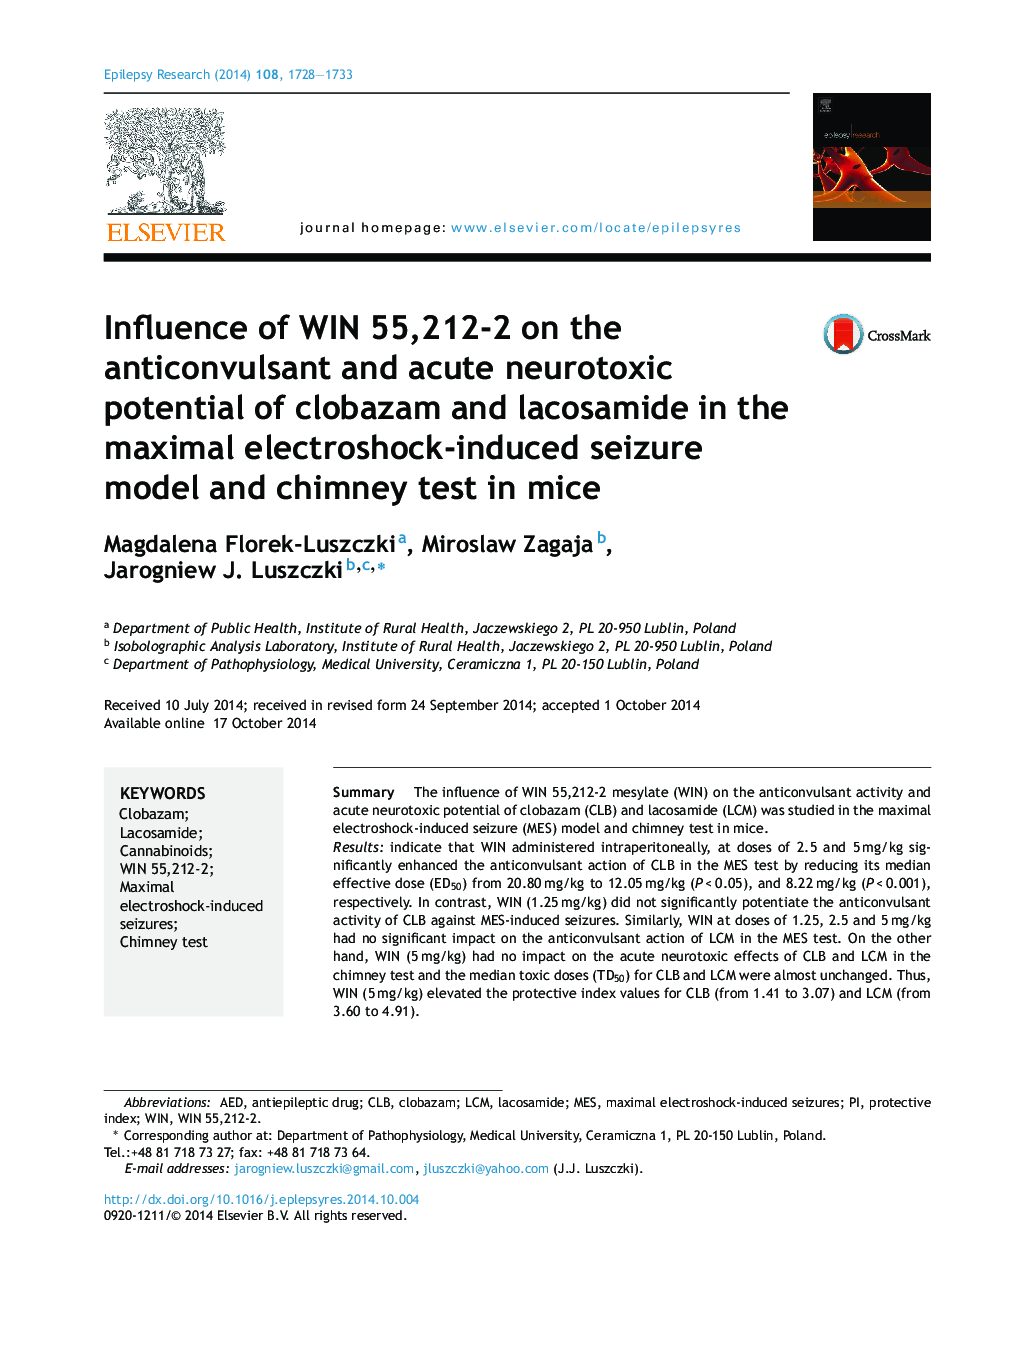 Influence of WIN 55,212-2 on the anticonvulsant and acute neurotoxic potential of clobazam and lacosamide in the maximal electroshock-induced seizure model and chimney test in mice